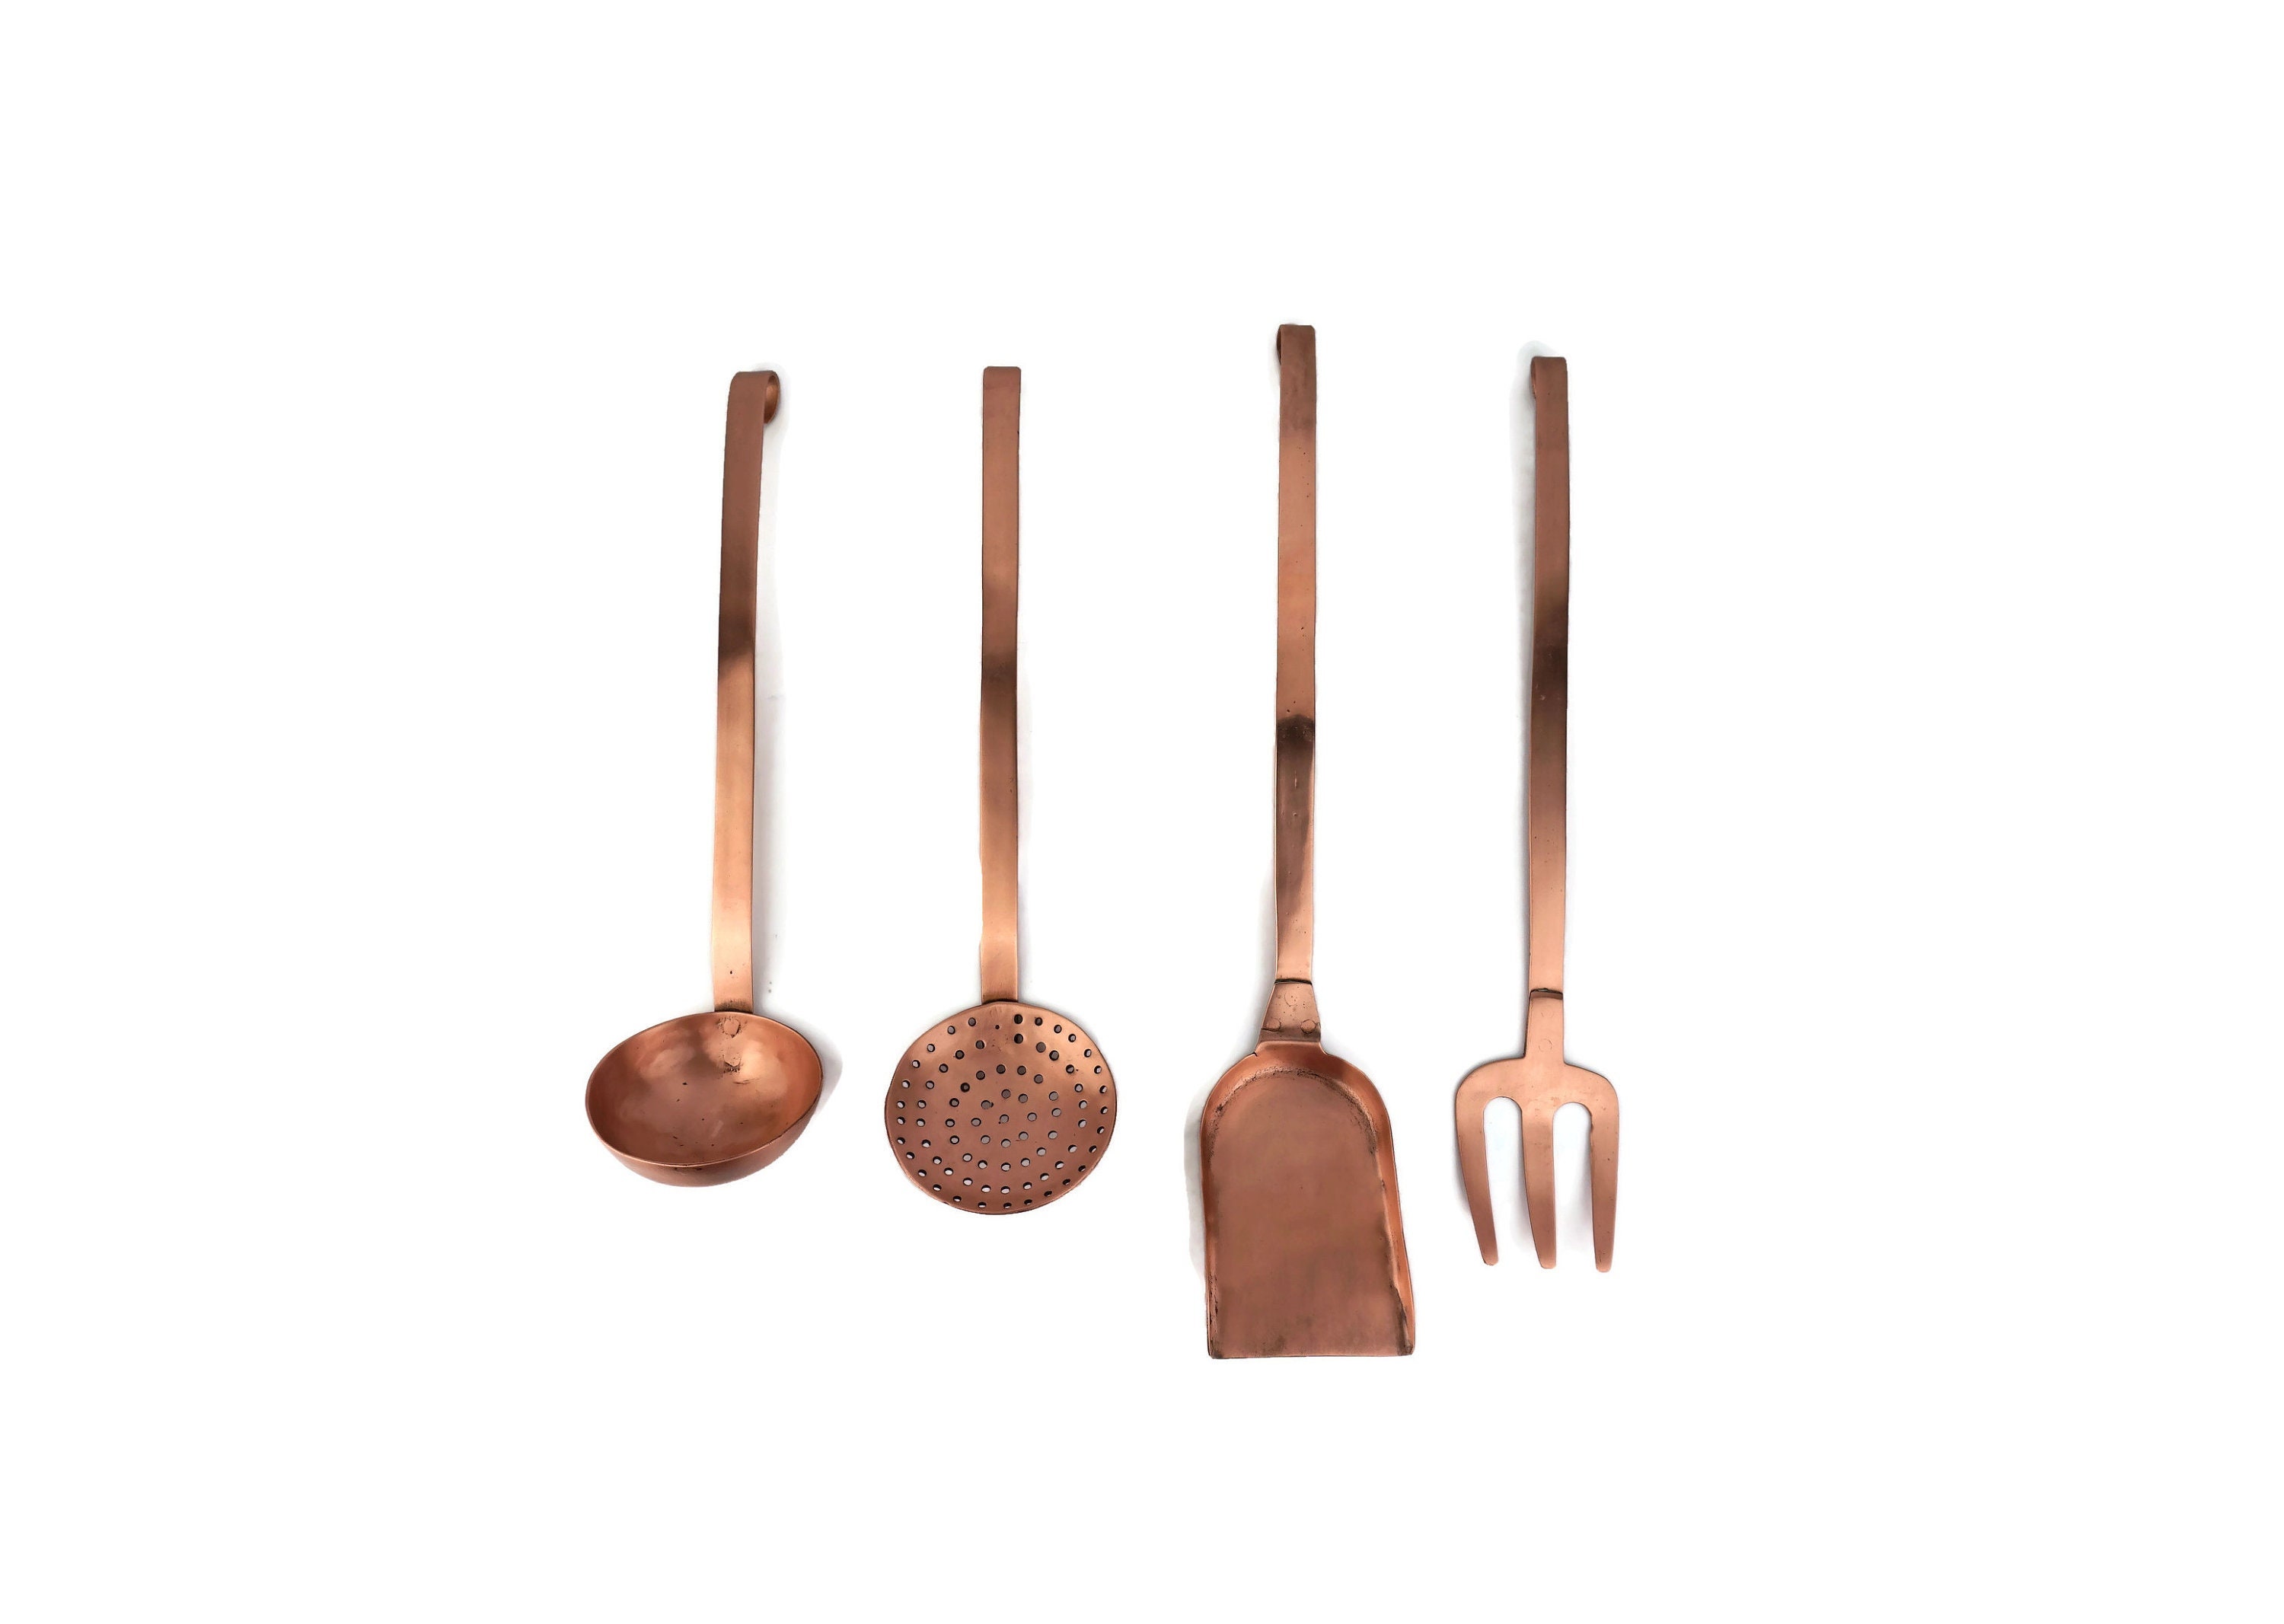 Styled Settings Copper Cooking Utensils for Cooking/Serving, Rose Gold  Kitchen Utensils -Stainless Steel Copper Serving Utensils Set 5